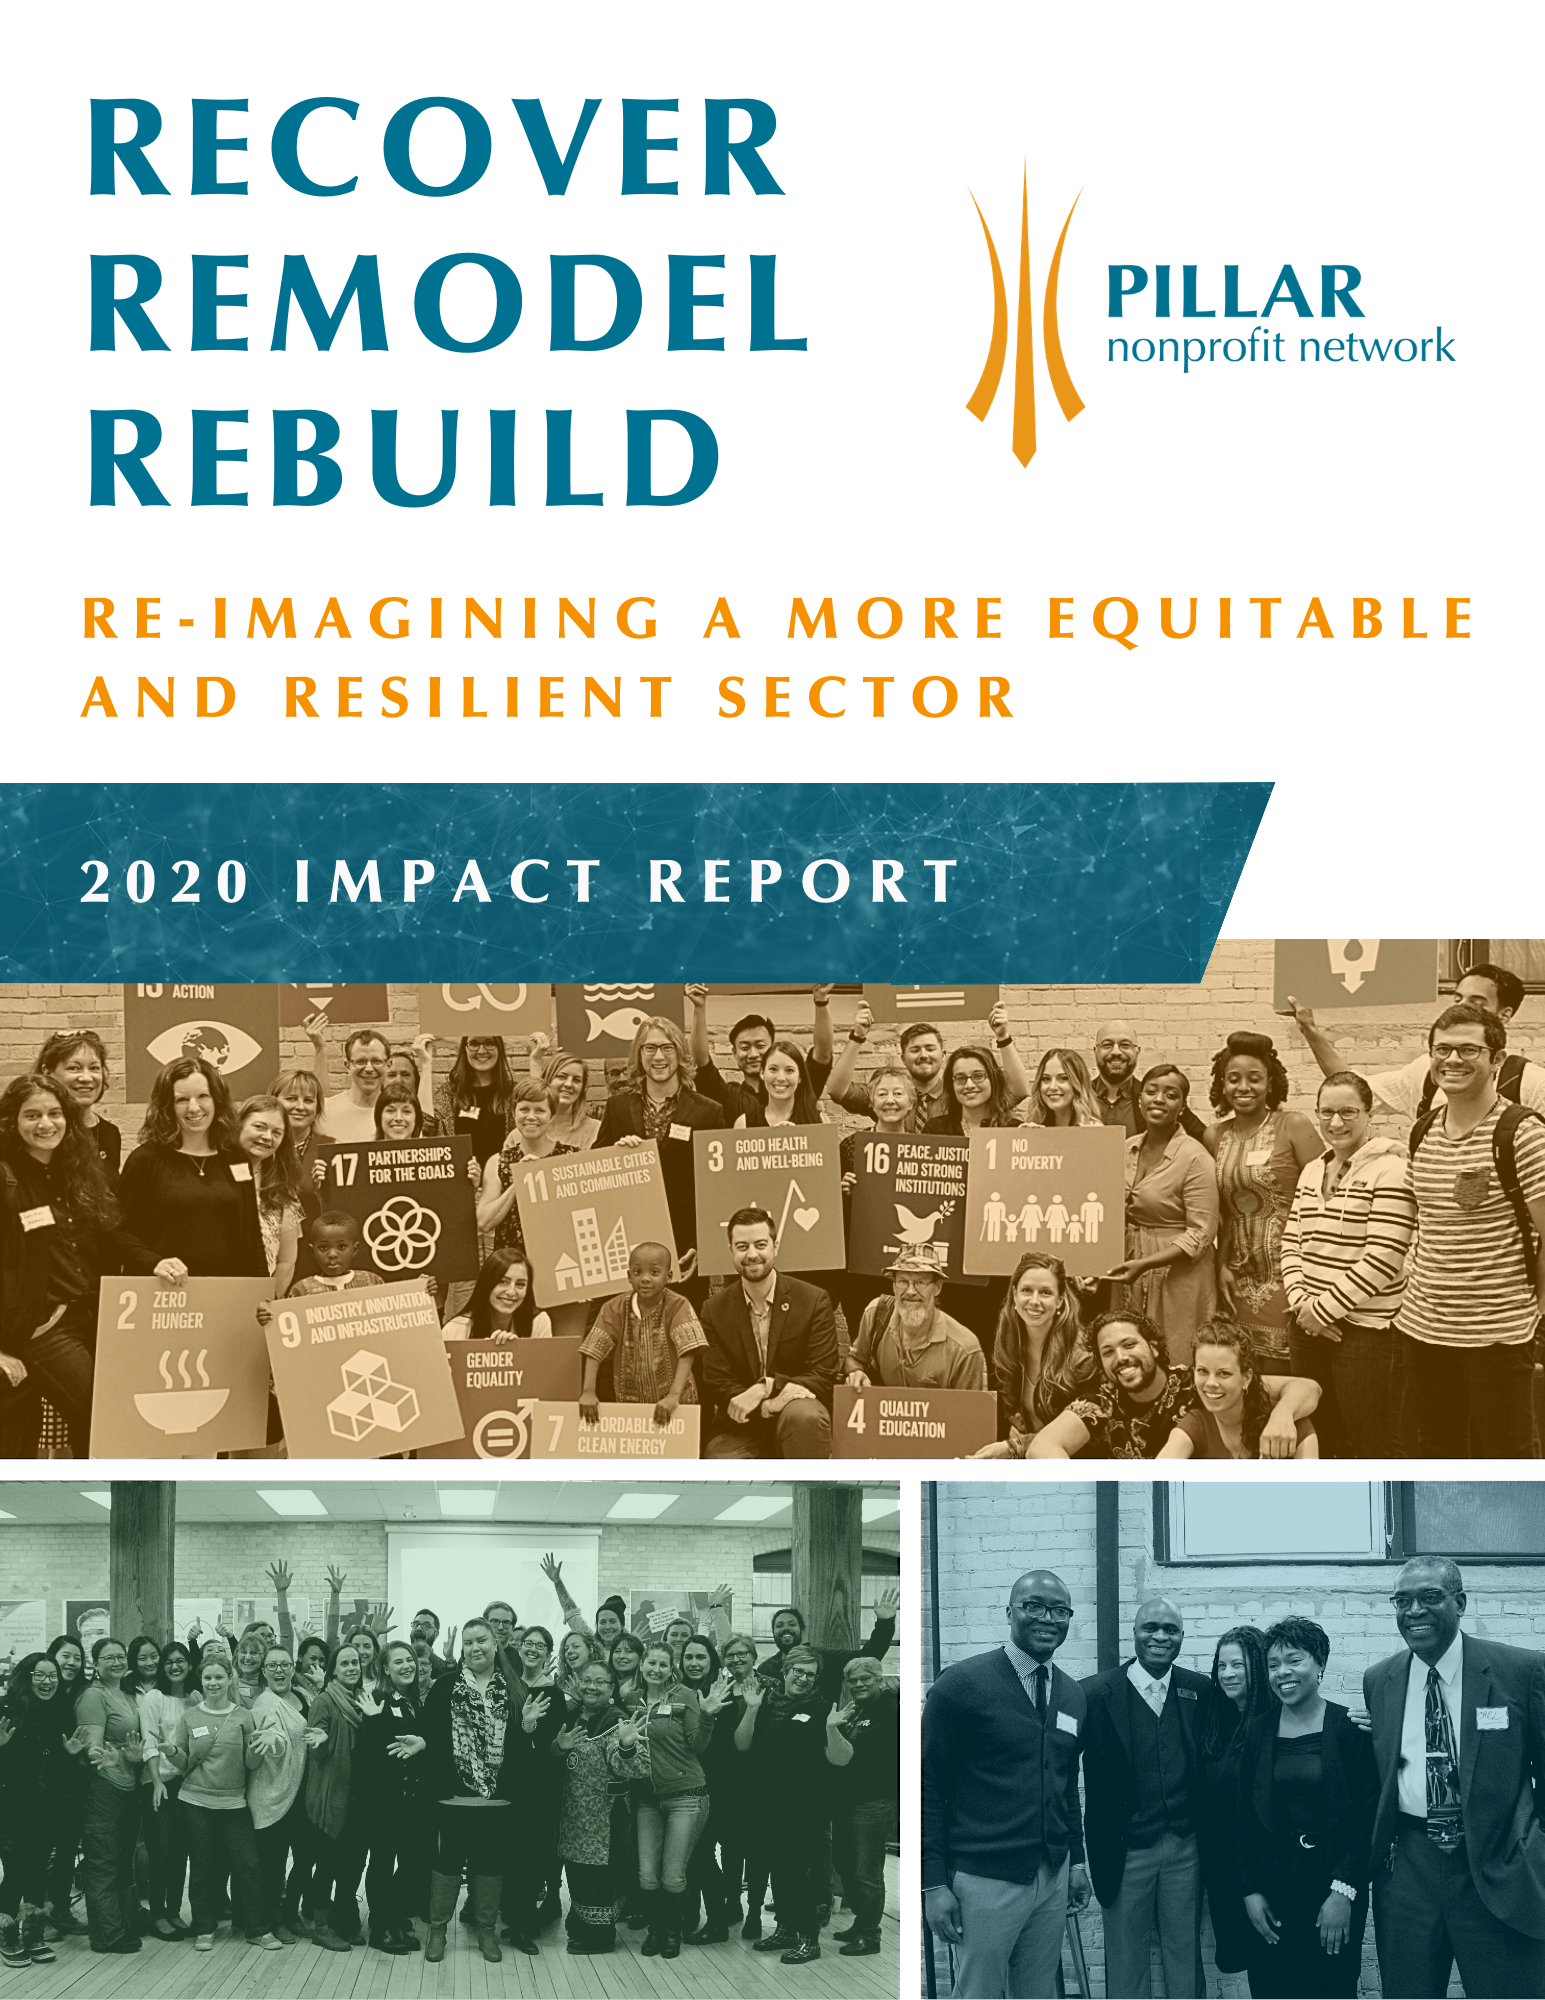 Image of the Front Page of Pillar's 2020 Impact Report